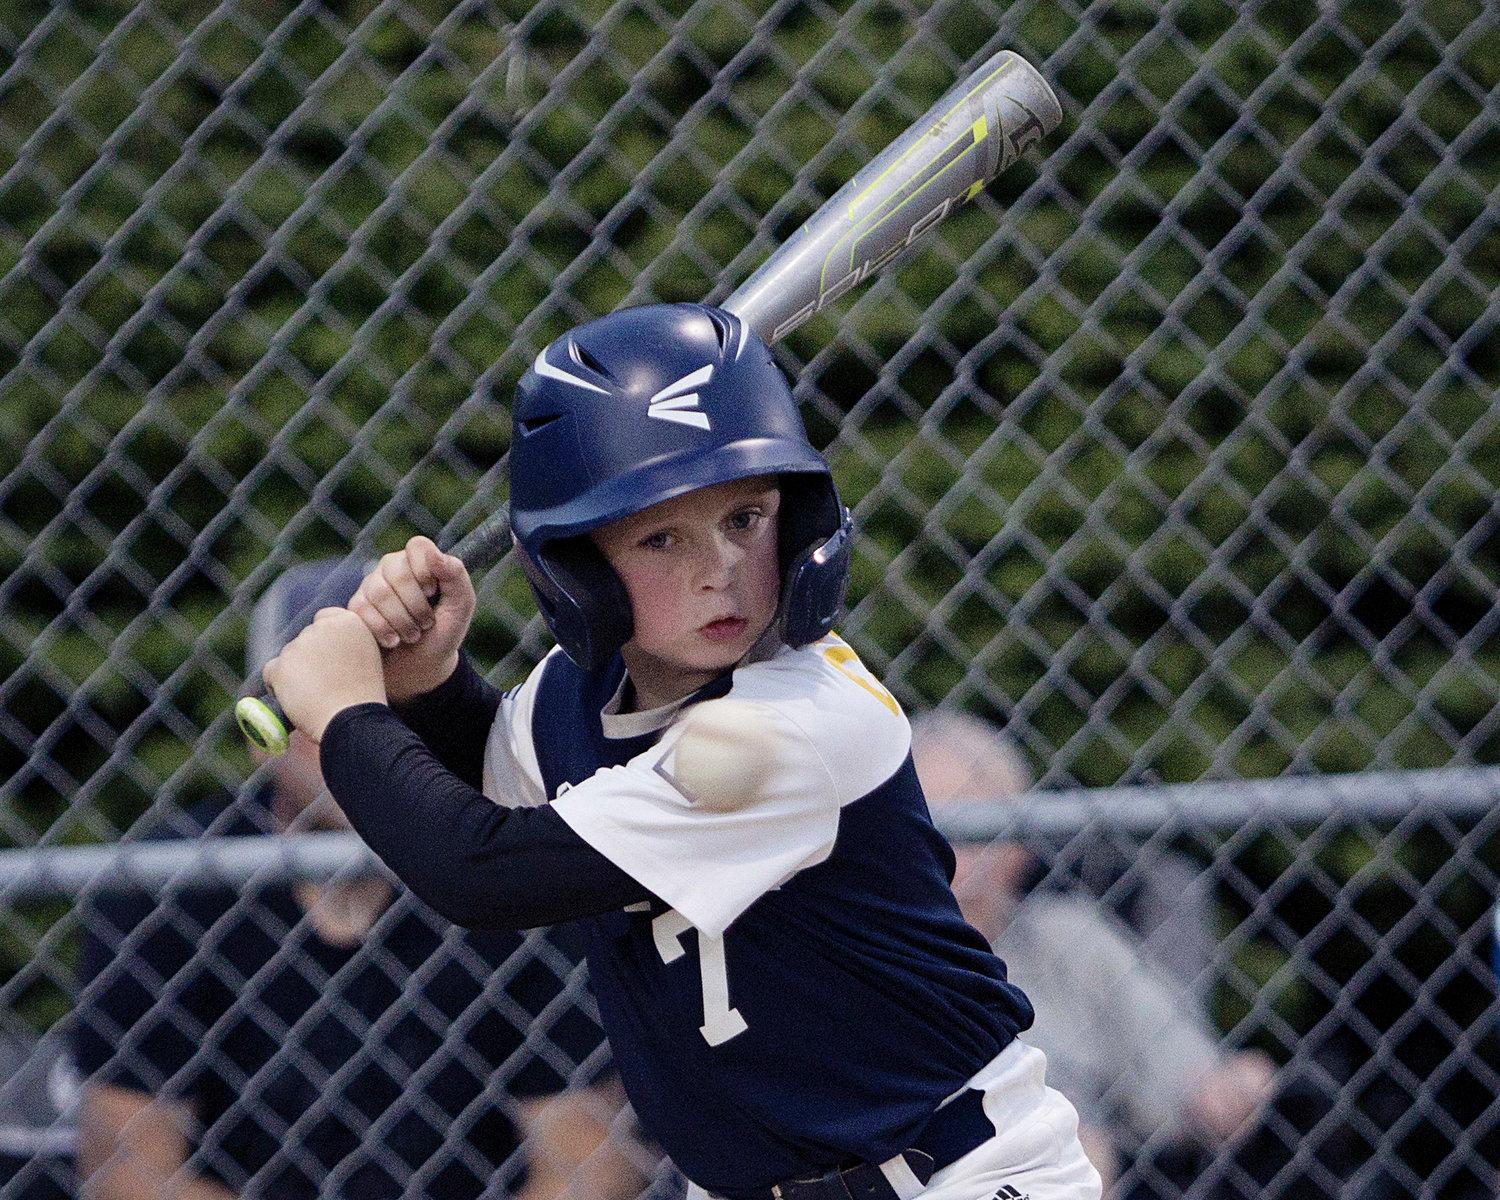 Harrison Collins watches the ball while up to bat against Cranston East in the 11U All-Star State Tournament, Wednesday.